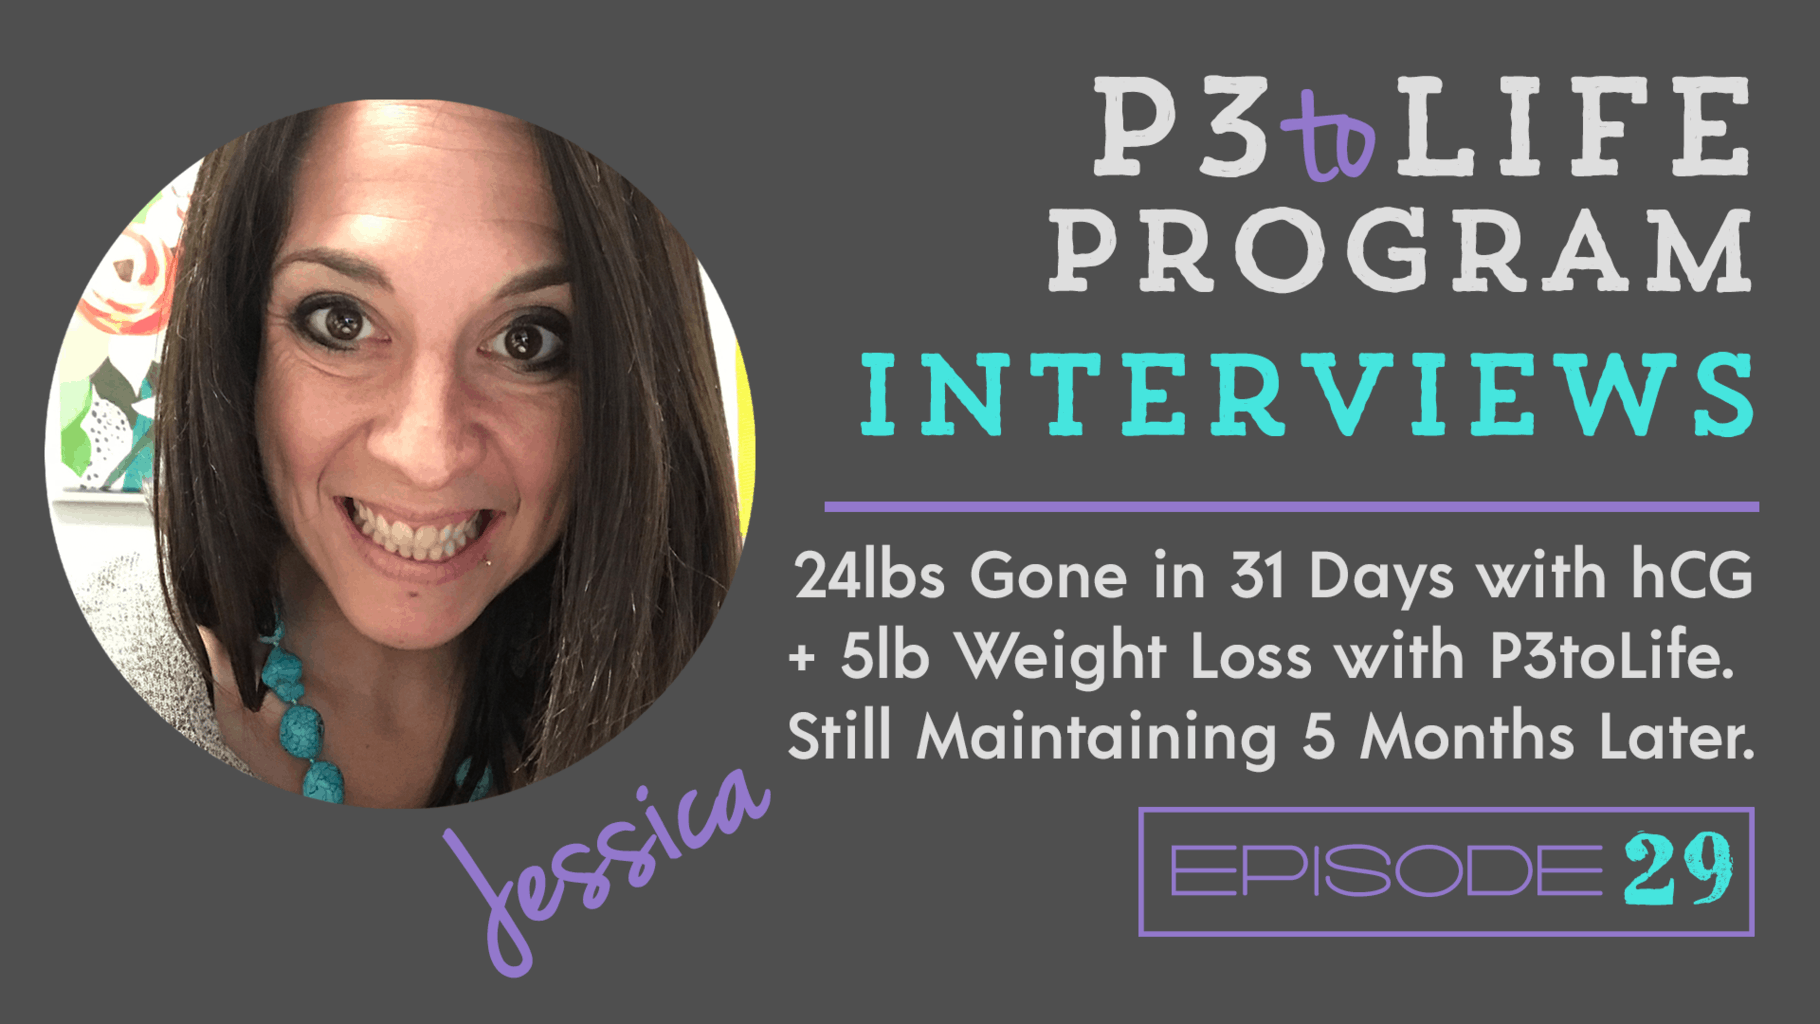 P3tolife-phase-3-5-lbs-weight-loss-still-maintaining-5-months-later-24-lbs-gone-in-31-days-with-hcg-episode-29-jessica